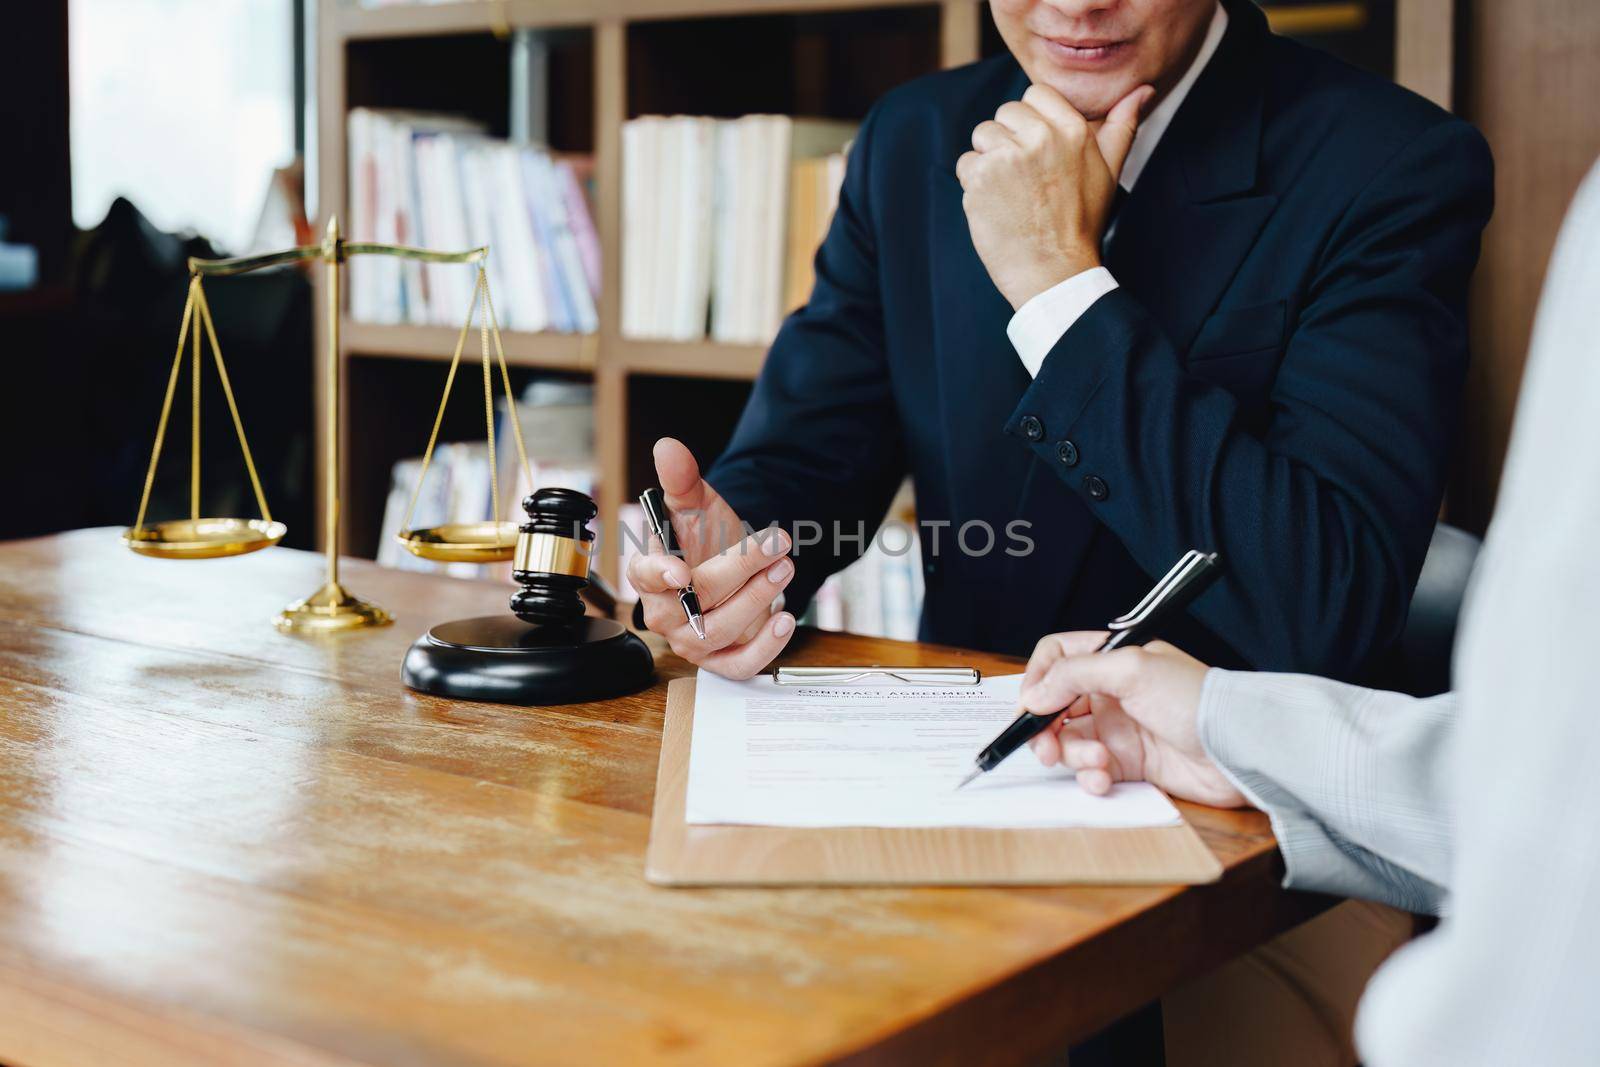 Discussing legal matters and signing important documents by Manastrong